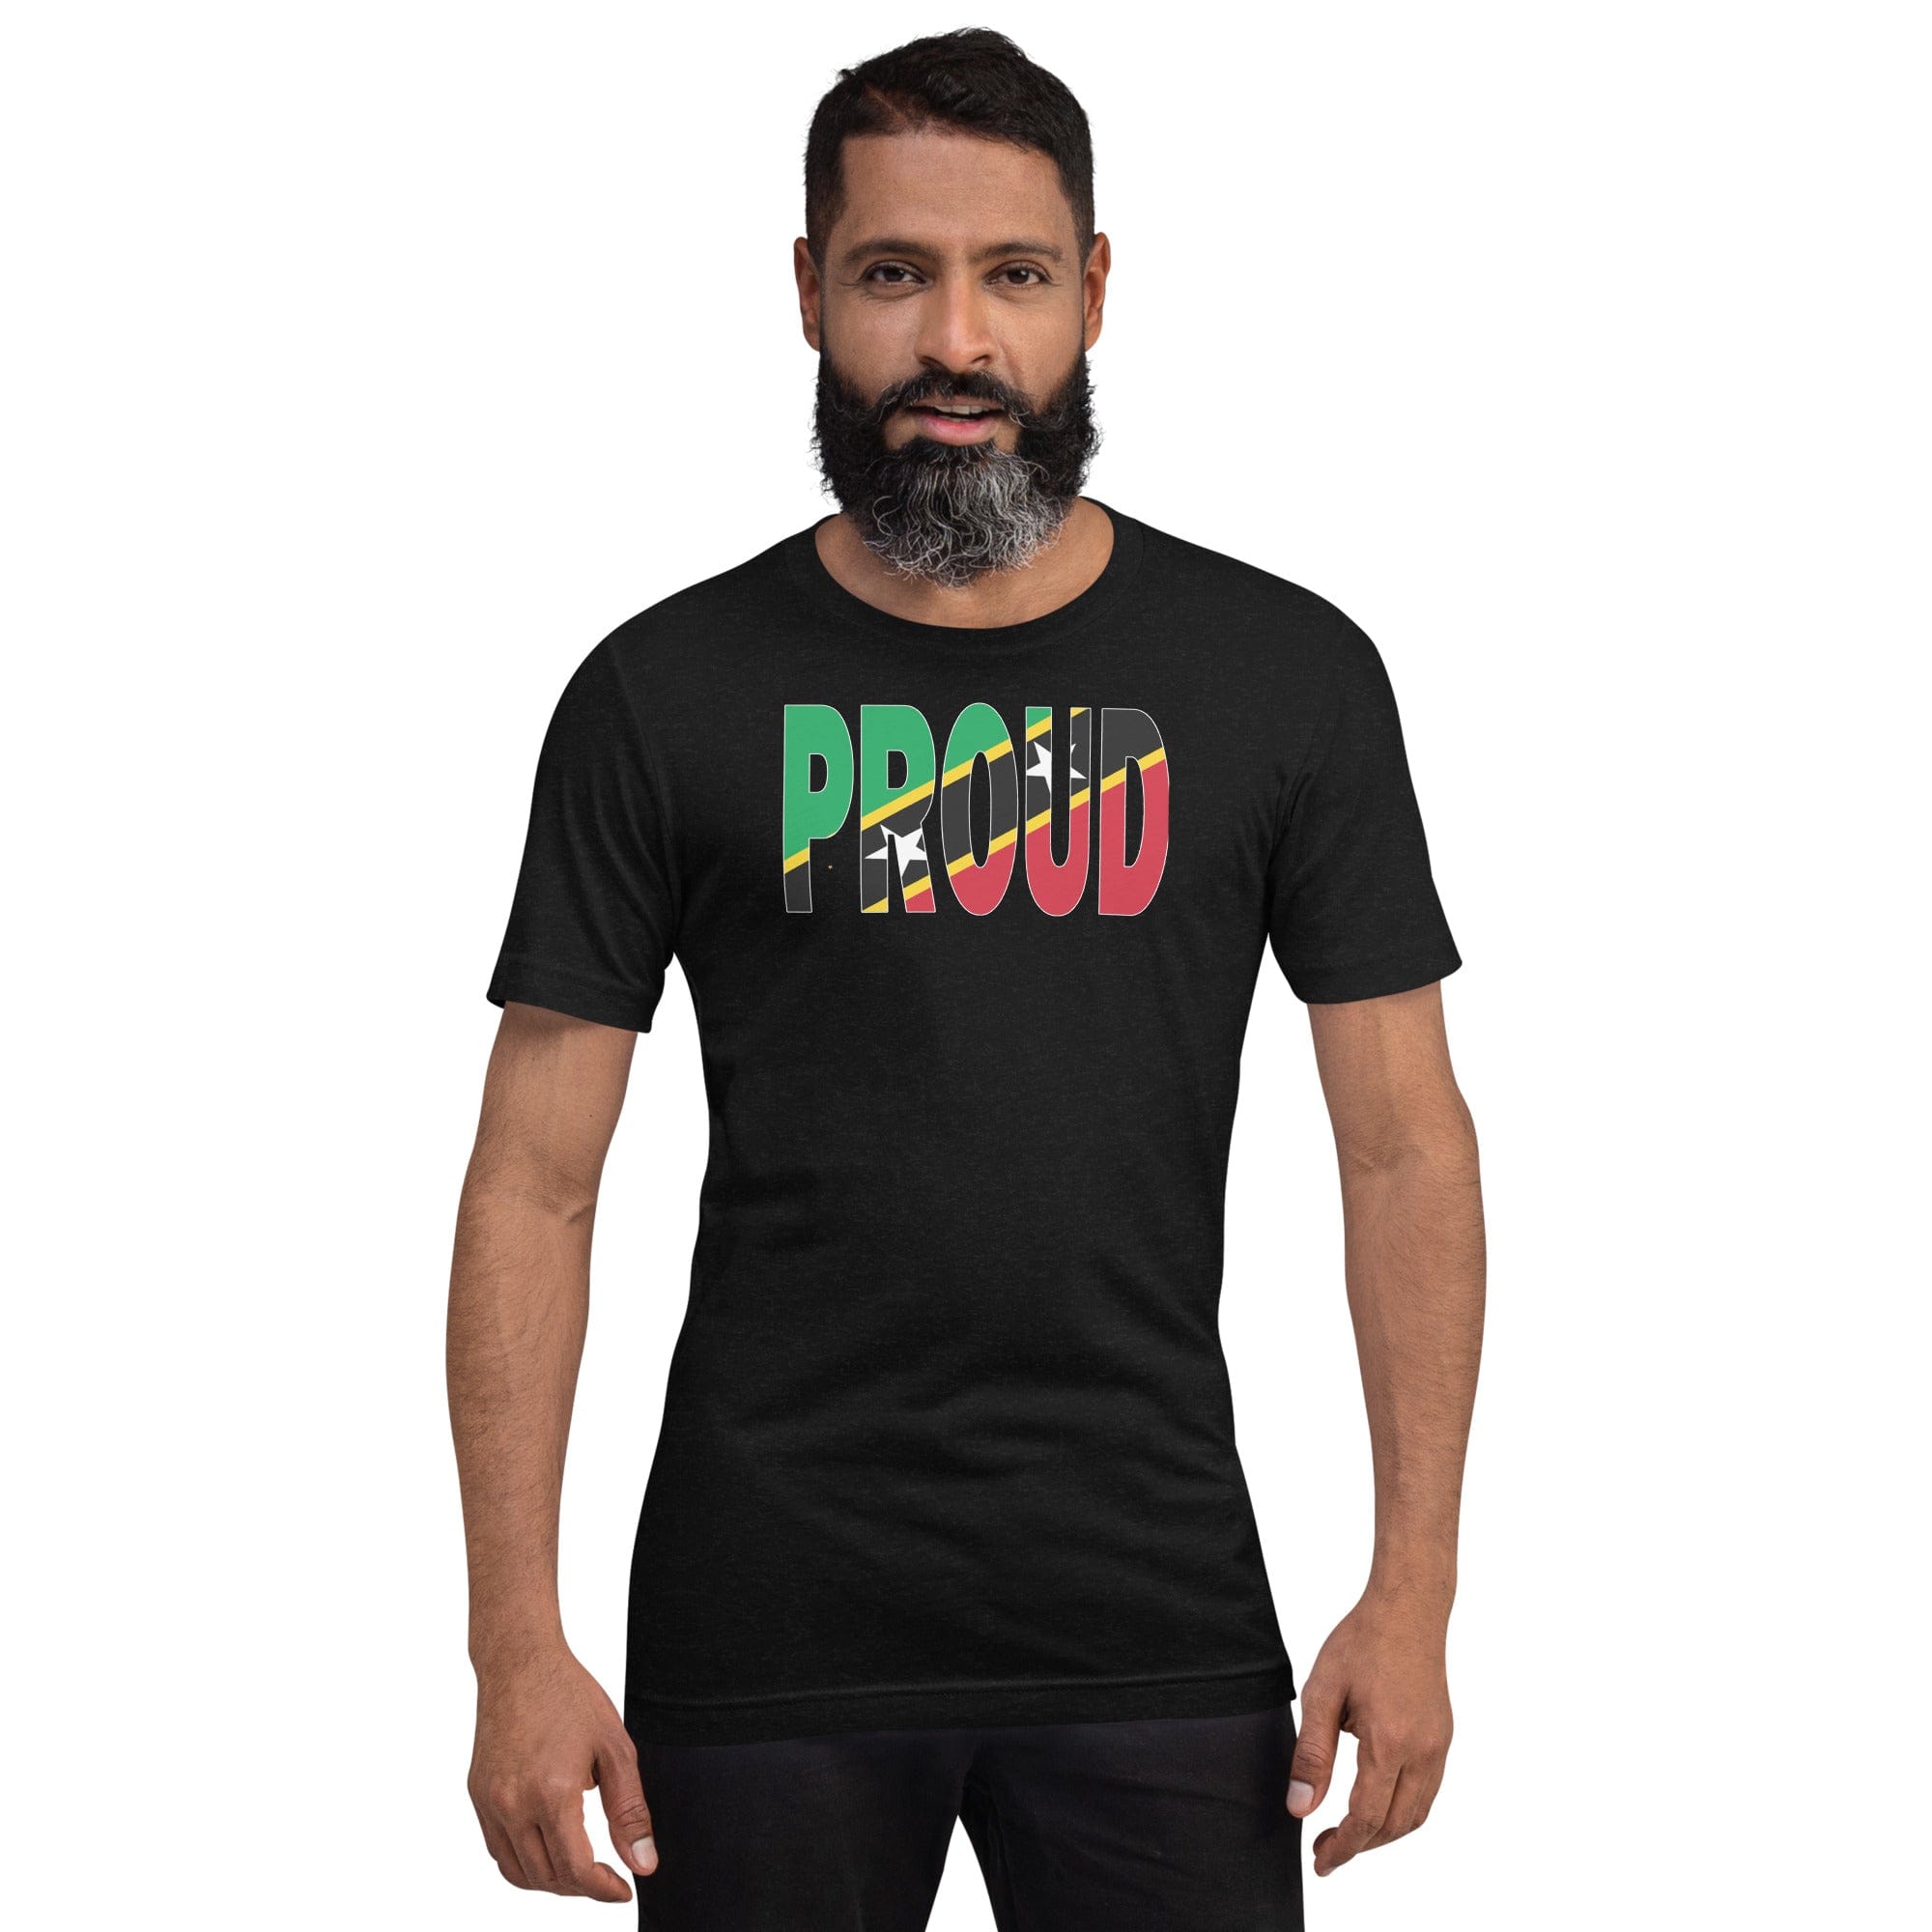 St. kitts Flag designed to spell Proud on a black color t-shirt worn by a black man.